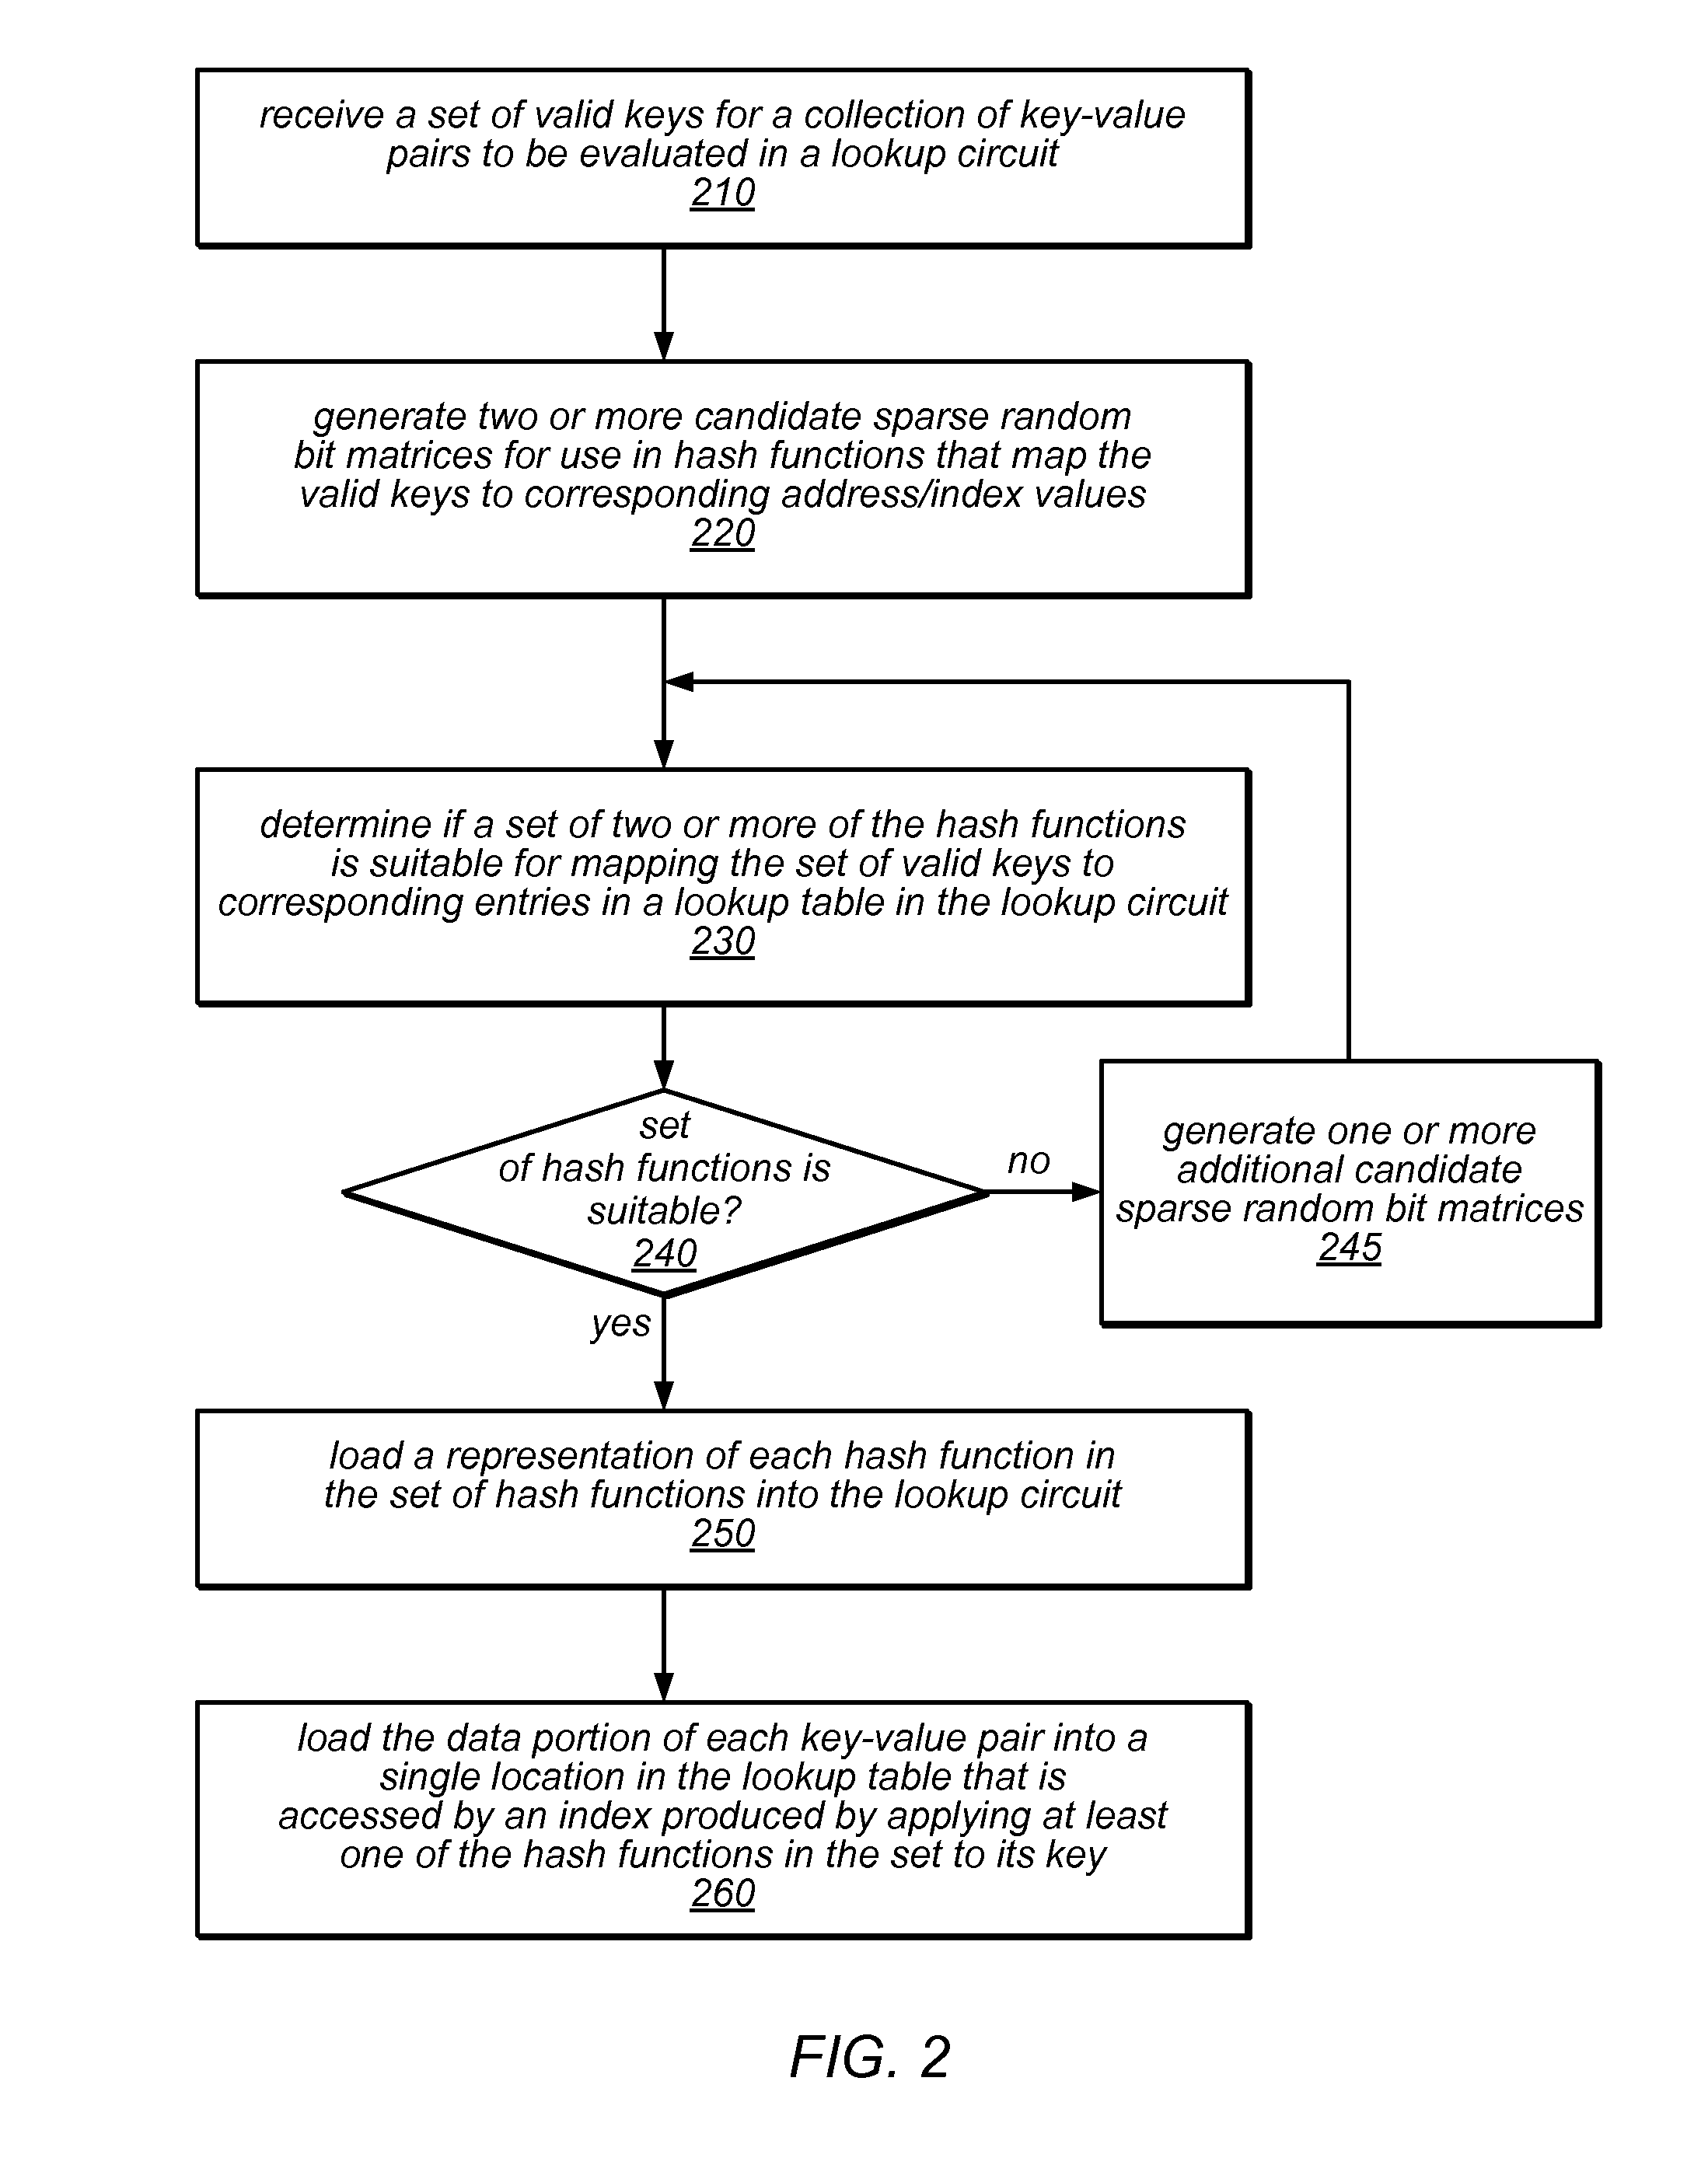 Systems and Methods for Implementing Low-Latency Lookup Circuits Using Sparse Hash Functions